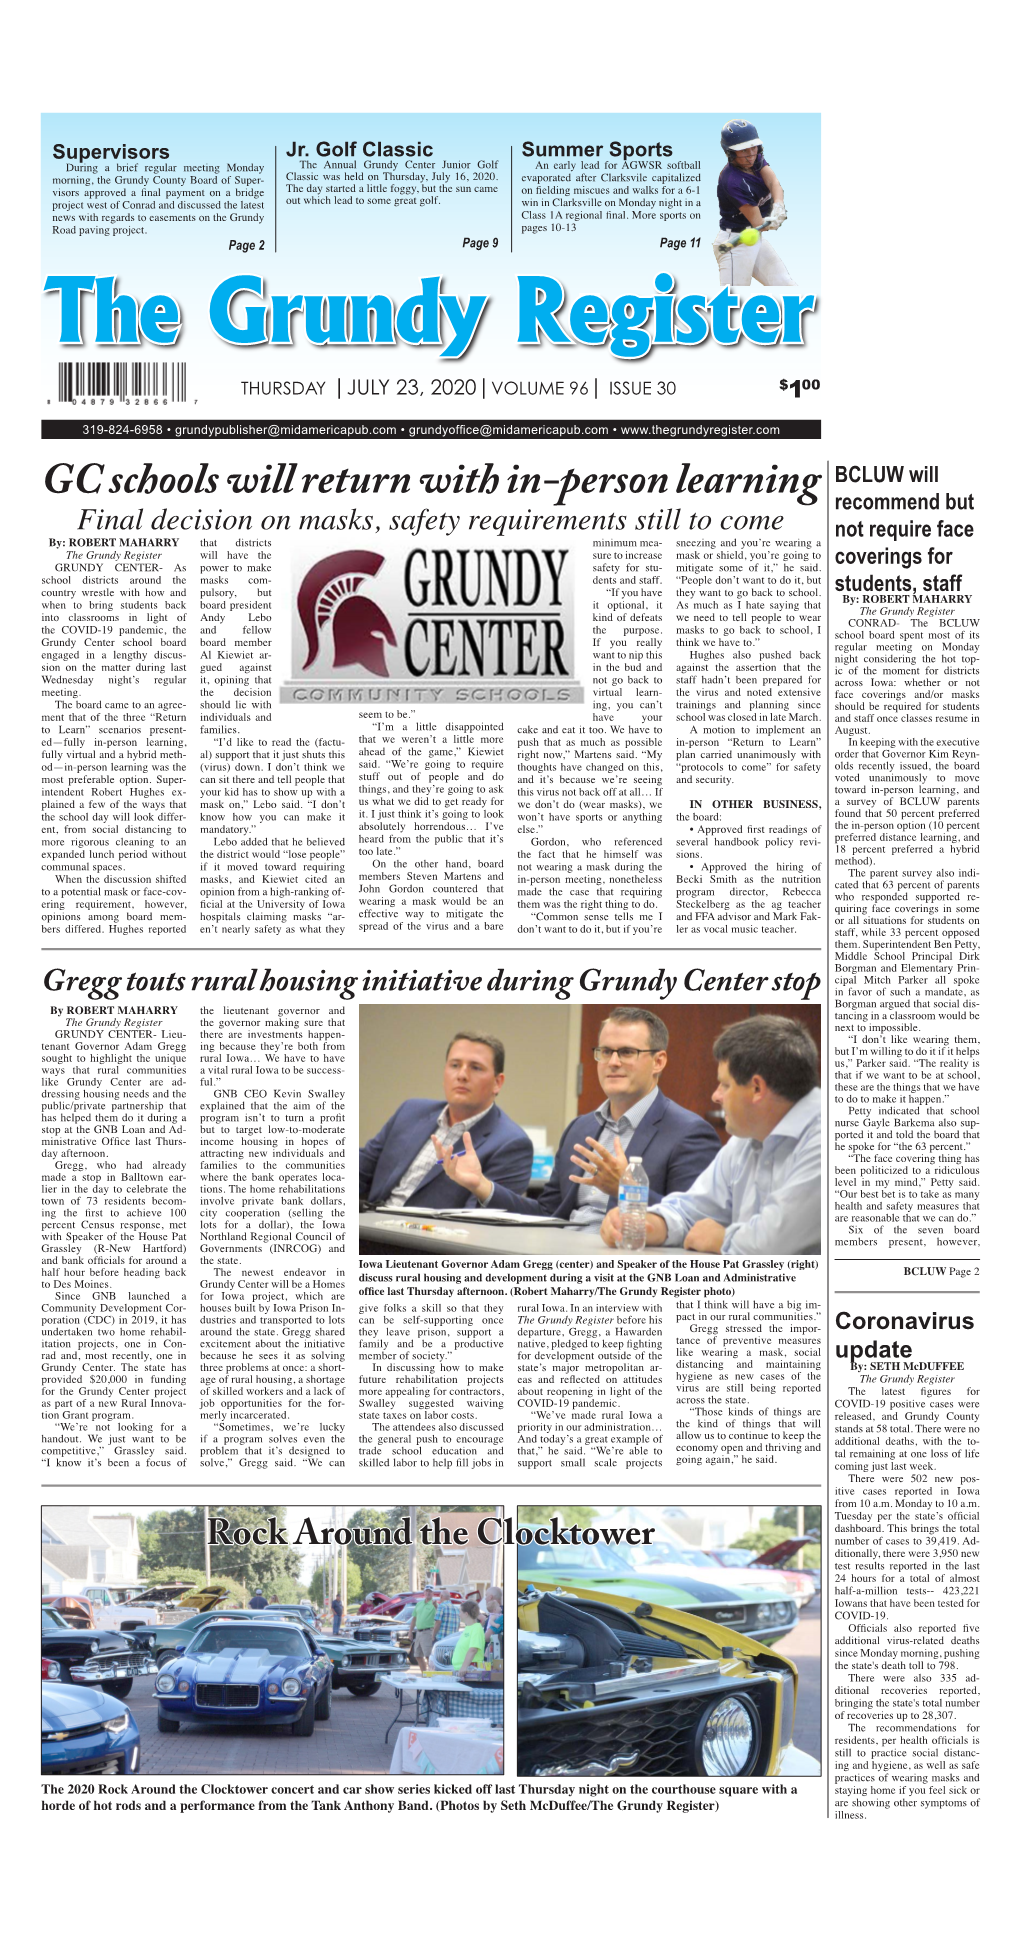 GC Schools Will Return with In-Person Learning